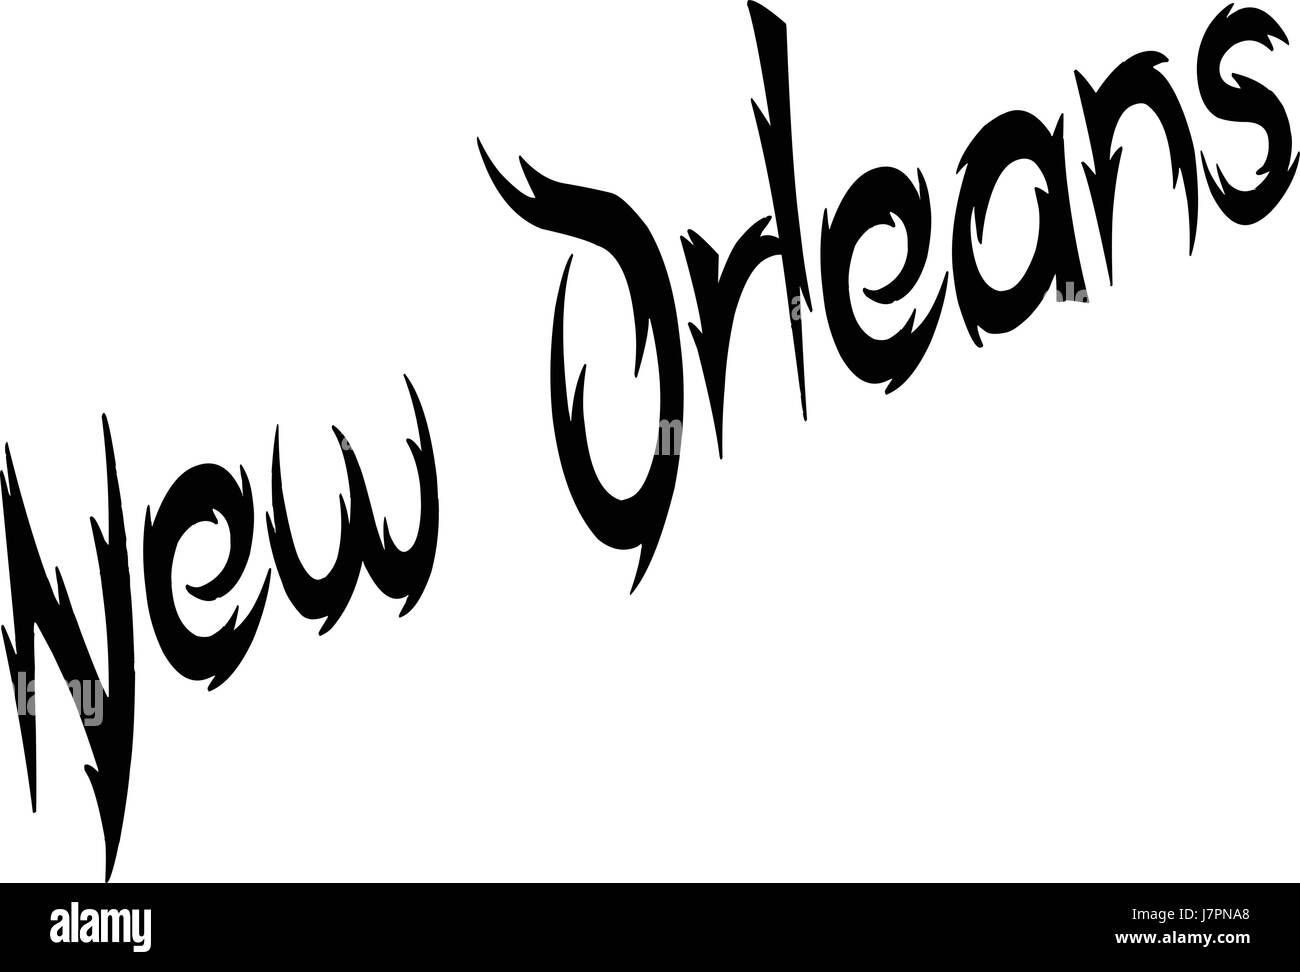 New Orleans text illustration on white background Stock Vector